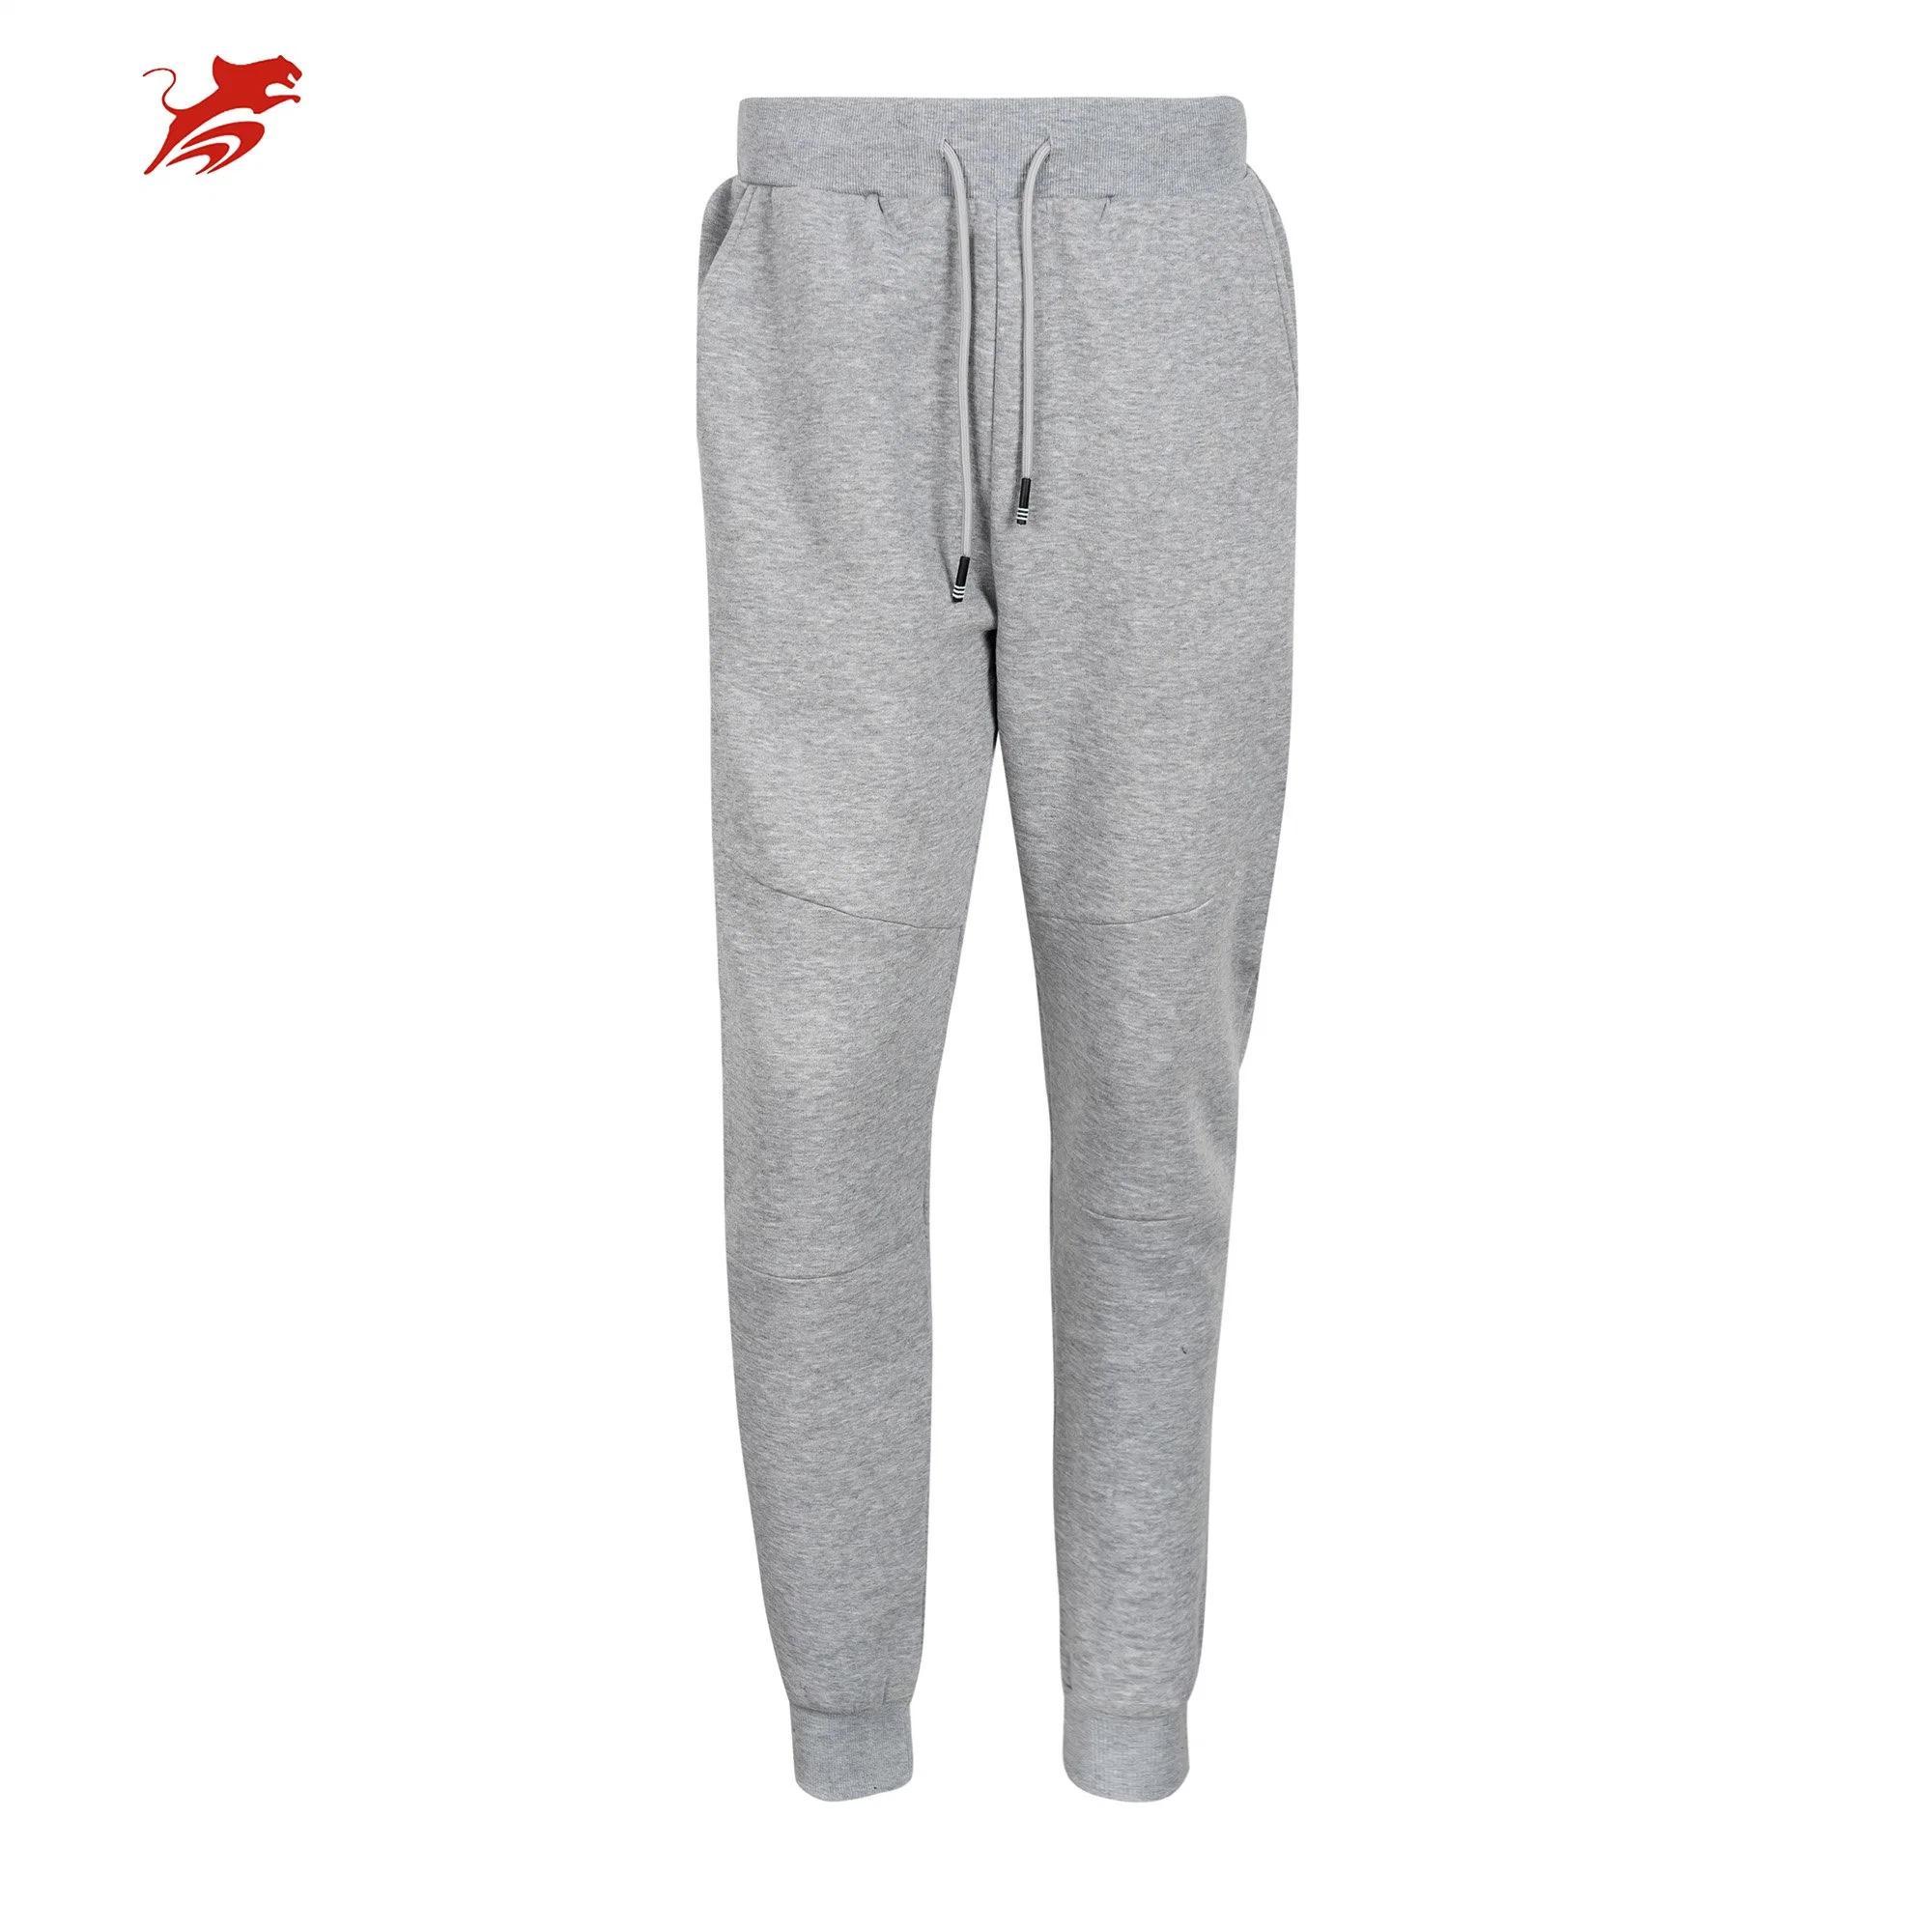 Asiapo China Factory Men's Customized Solid Color Warm Basic Sweatpant Trouser Fashion Jogging Running Casual Sports Fleece Pants